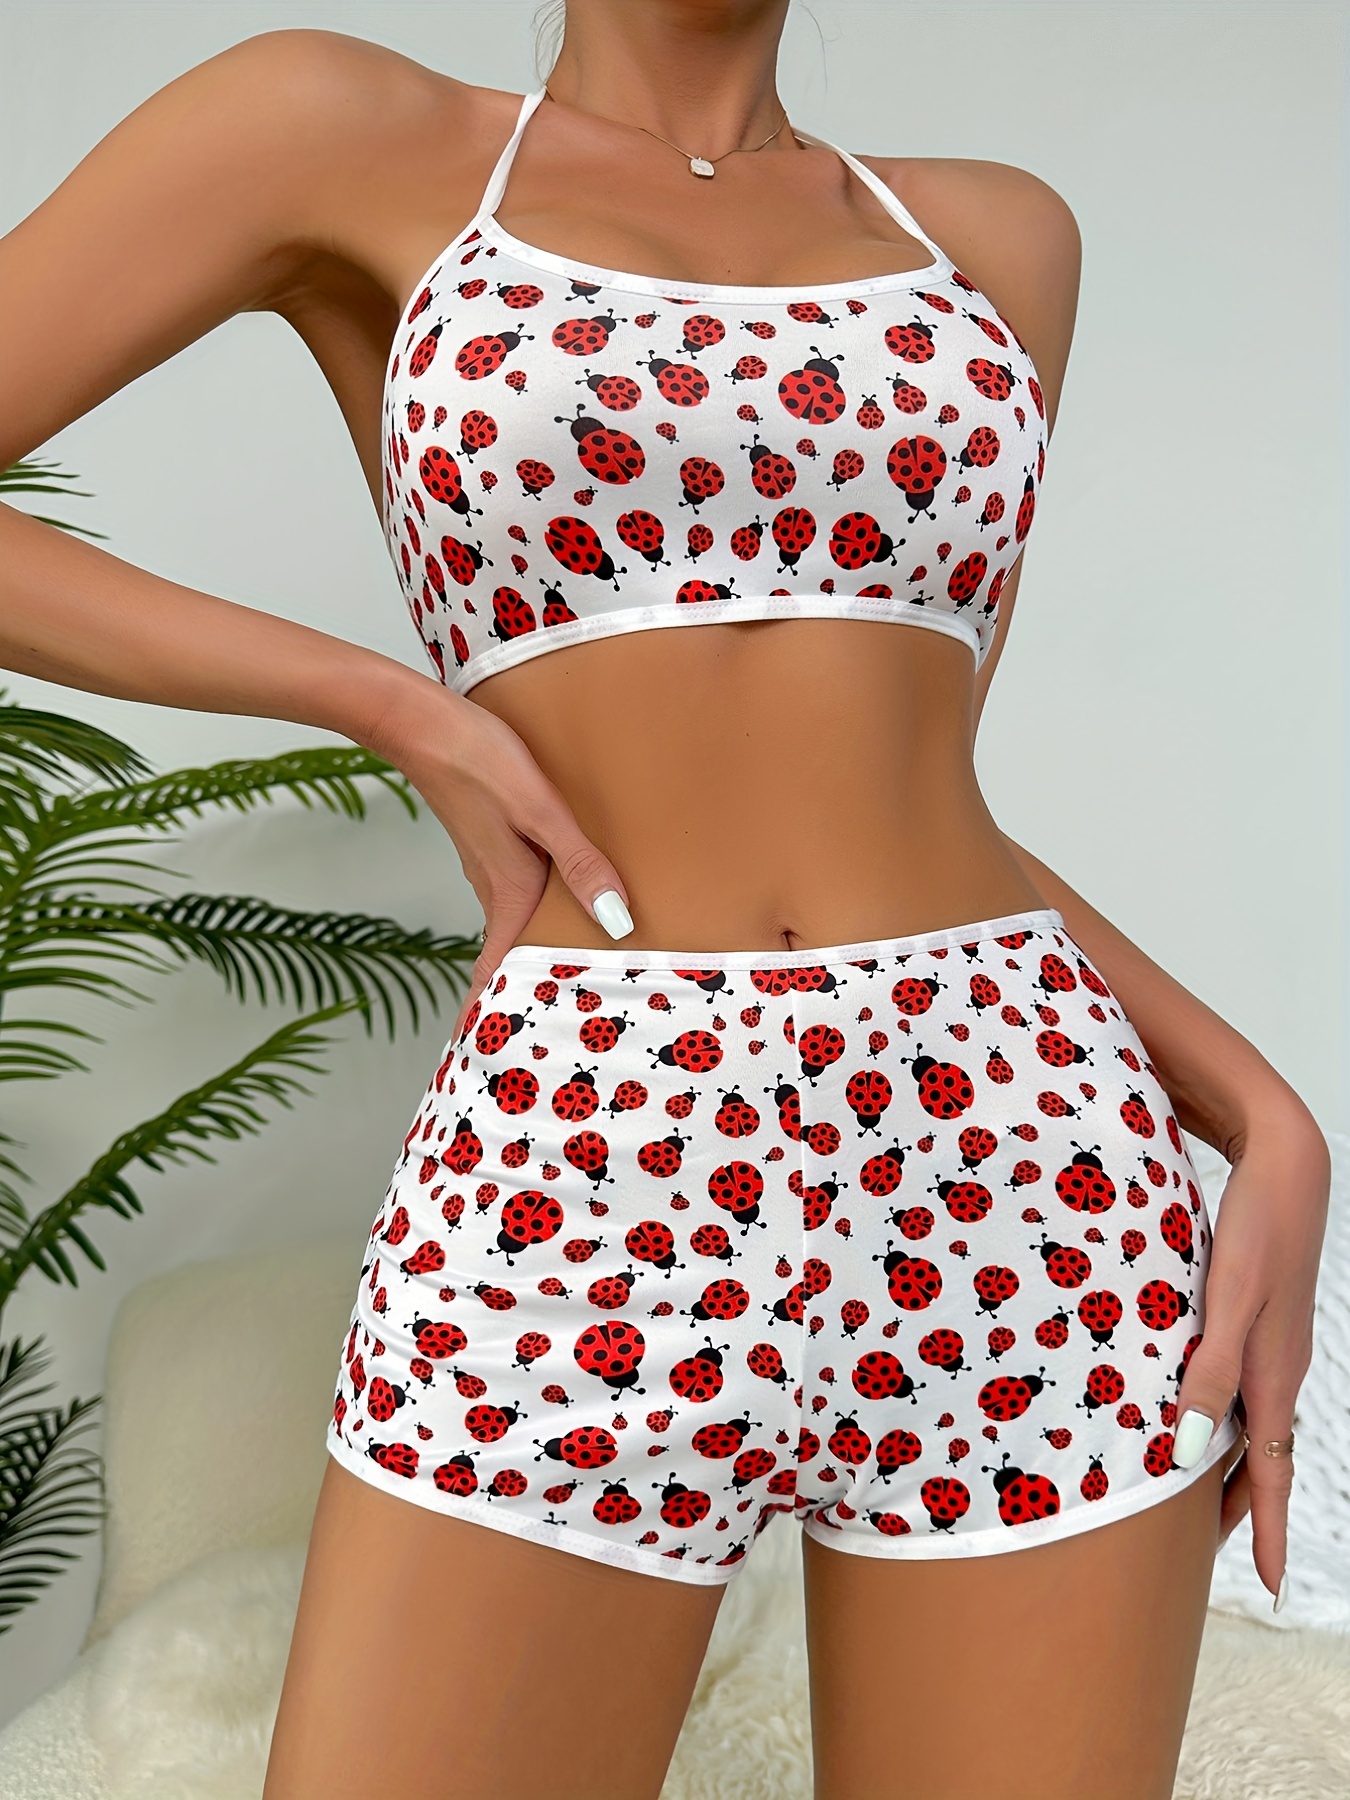 Cherry-print satin high-waisted panties in Multicolor for Women